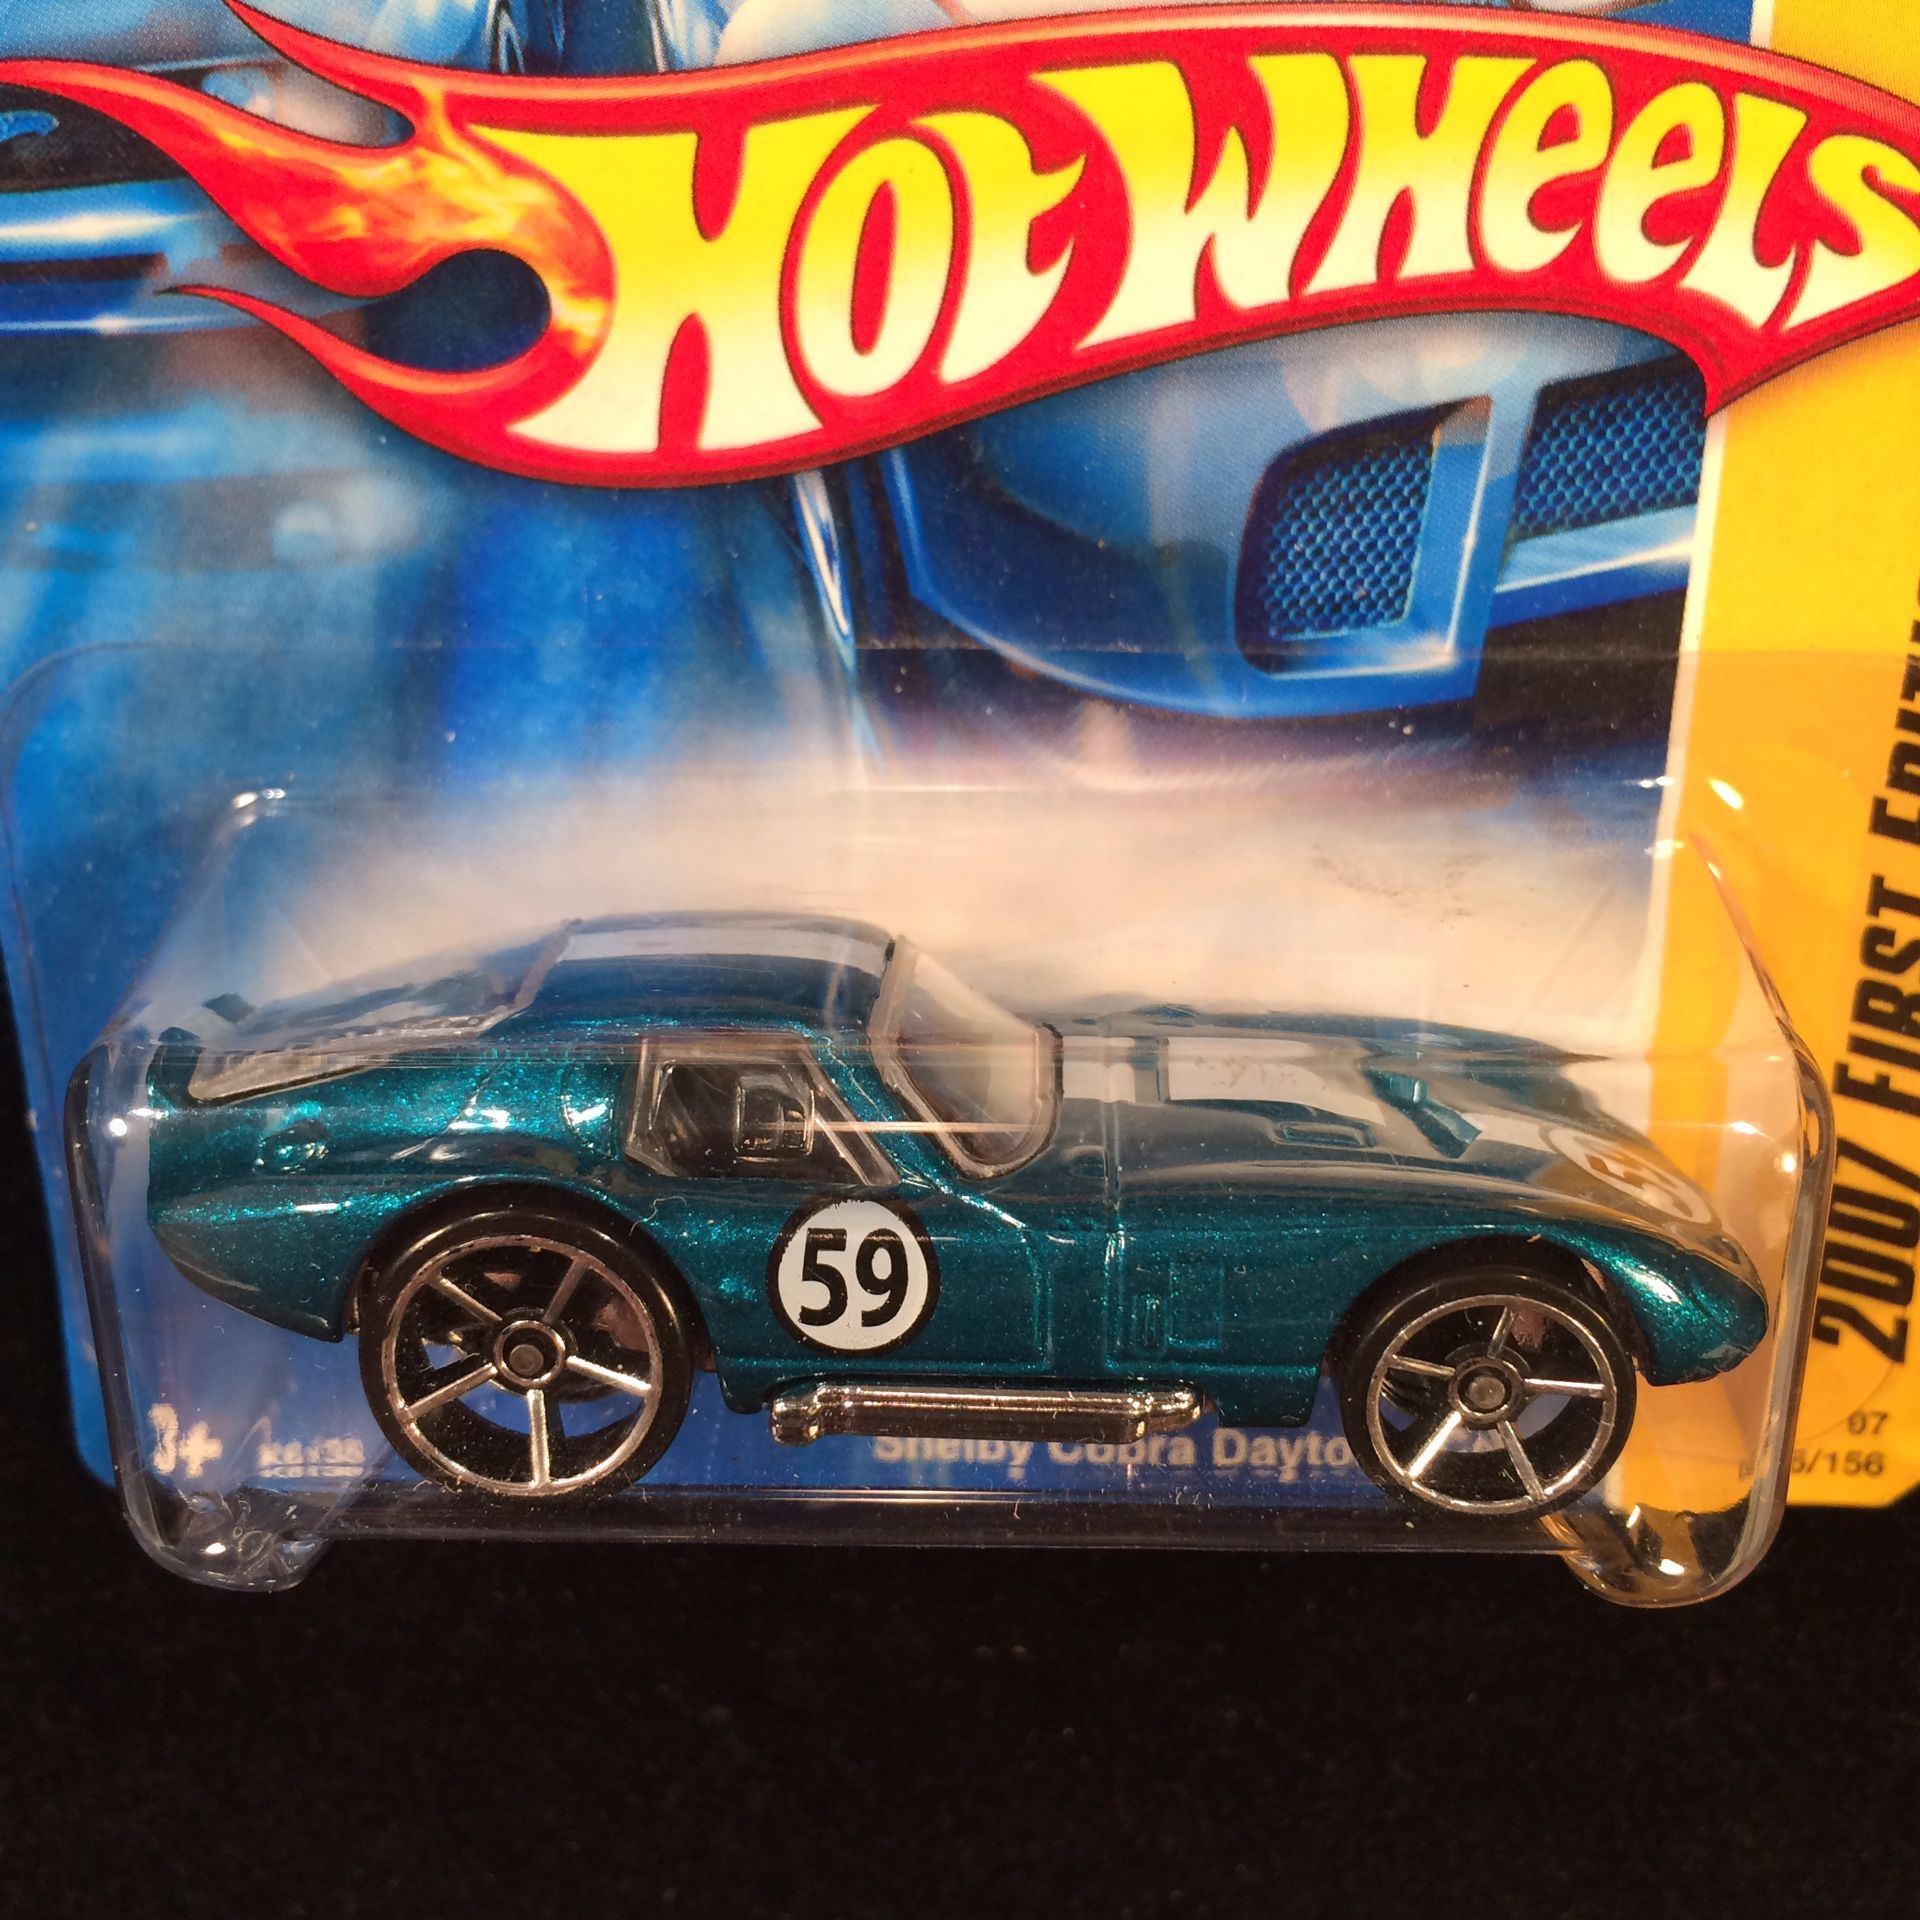 Hot Wheels 2007 First Editions Shelby Cobra Daytona Coupe Rare Teal • OH5SP Wheels • Rare Short Card Plus Treasure Hunt And Silver Original Casting 